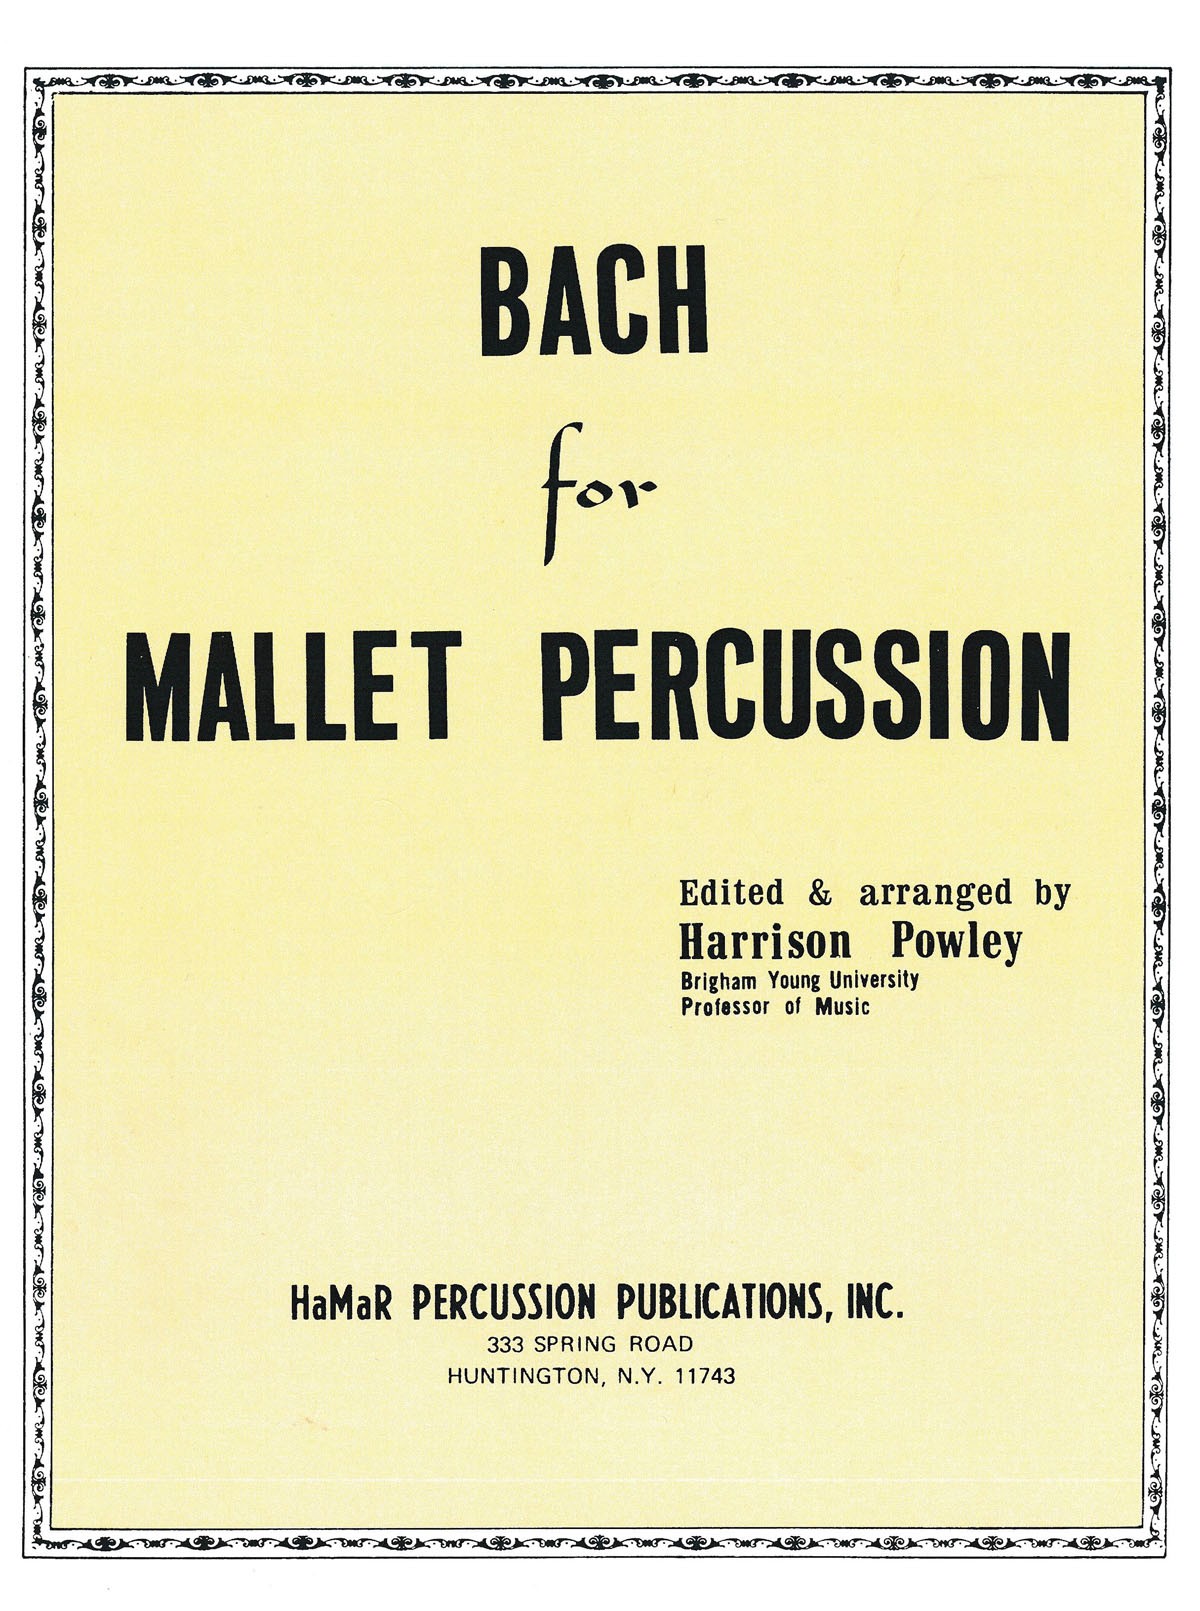 Bach for Mallet Percussion by Bach arr. Harrison Powley